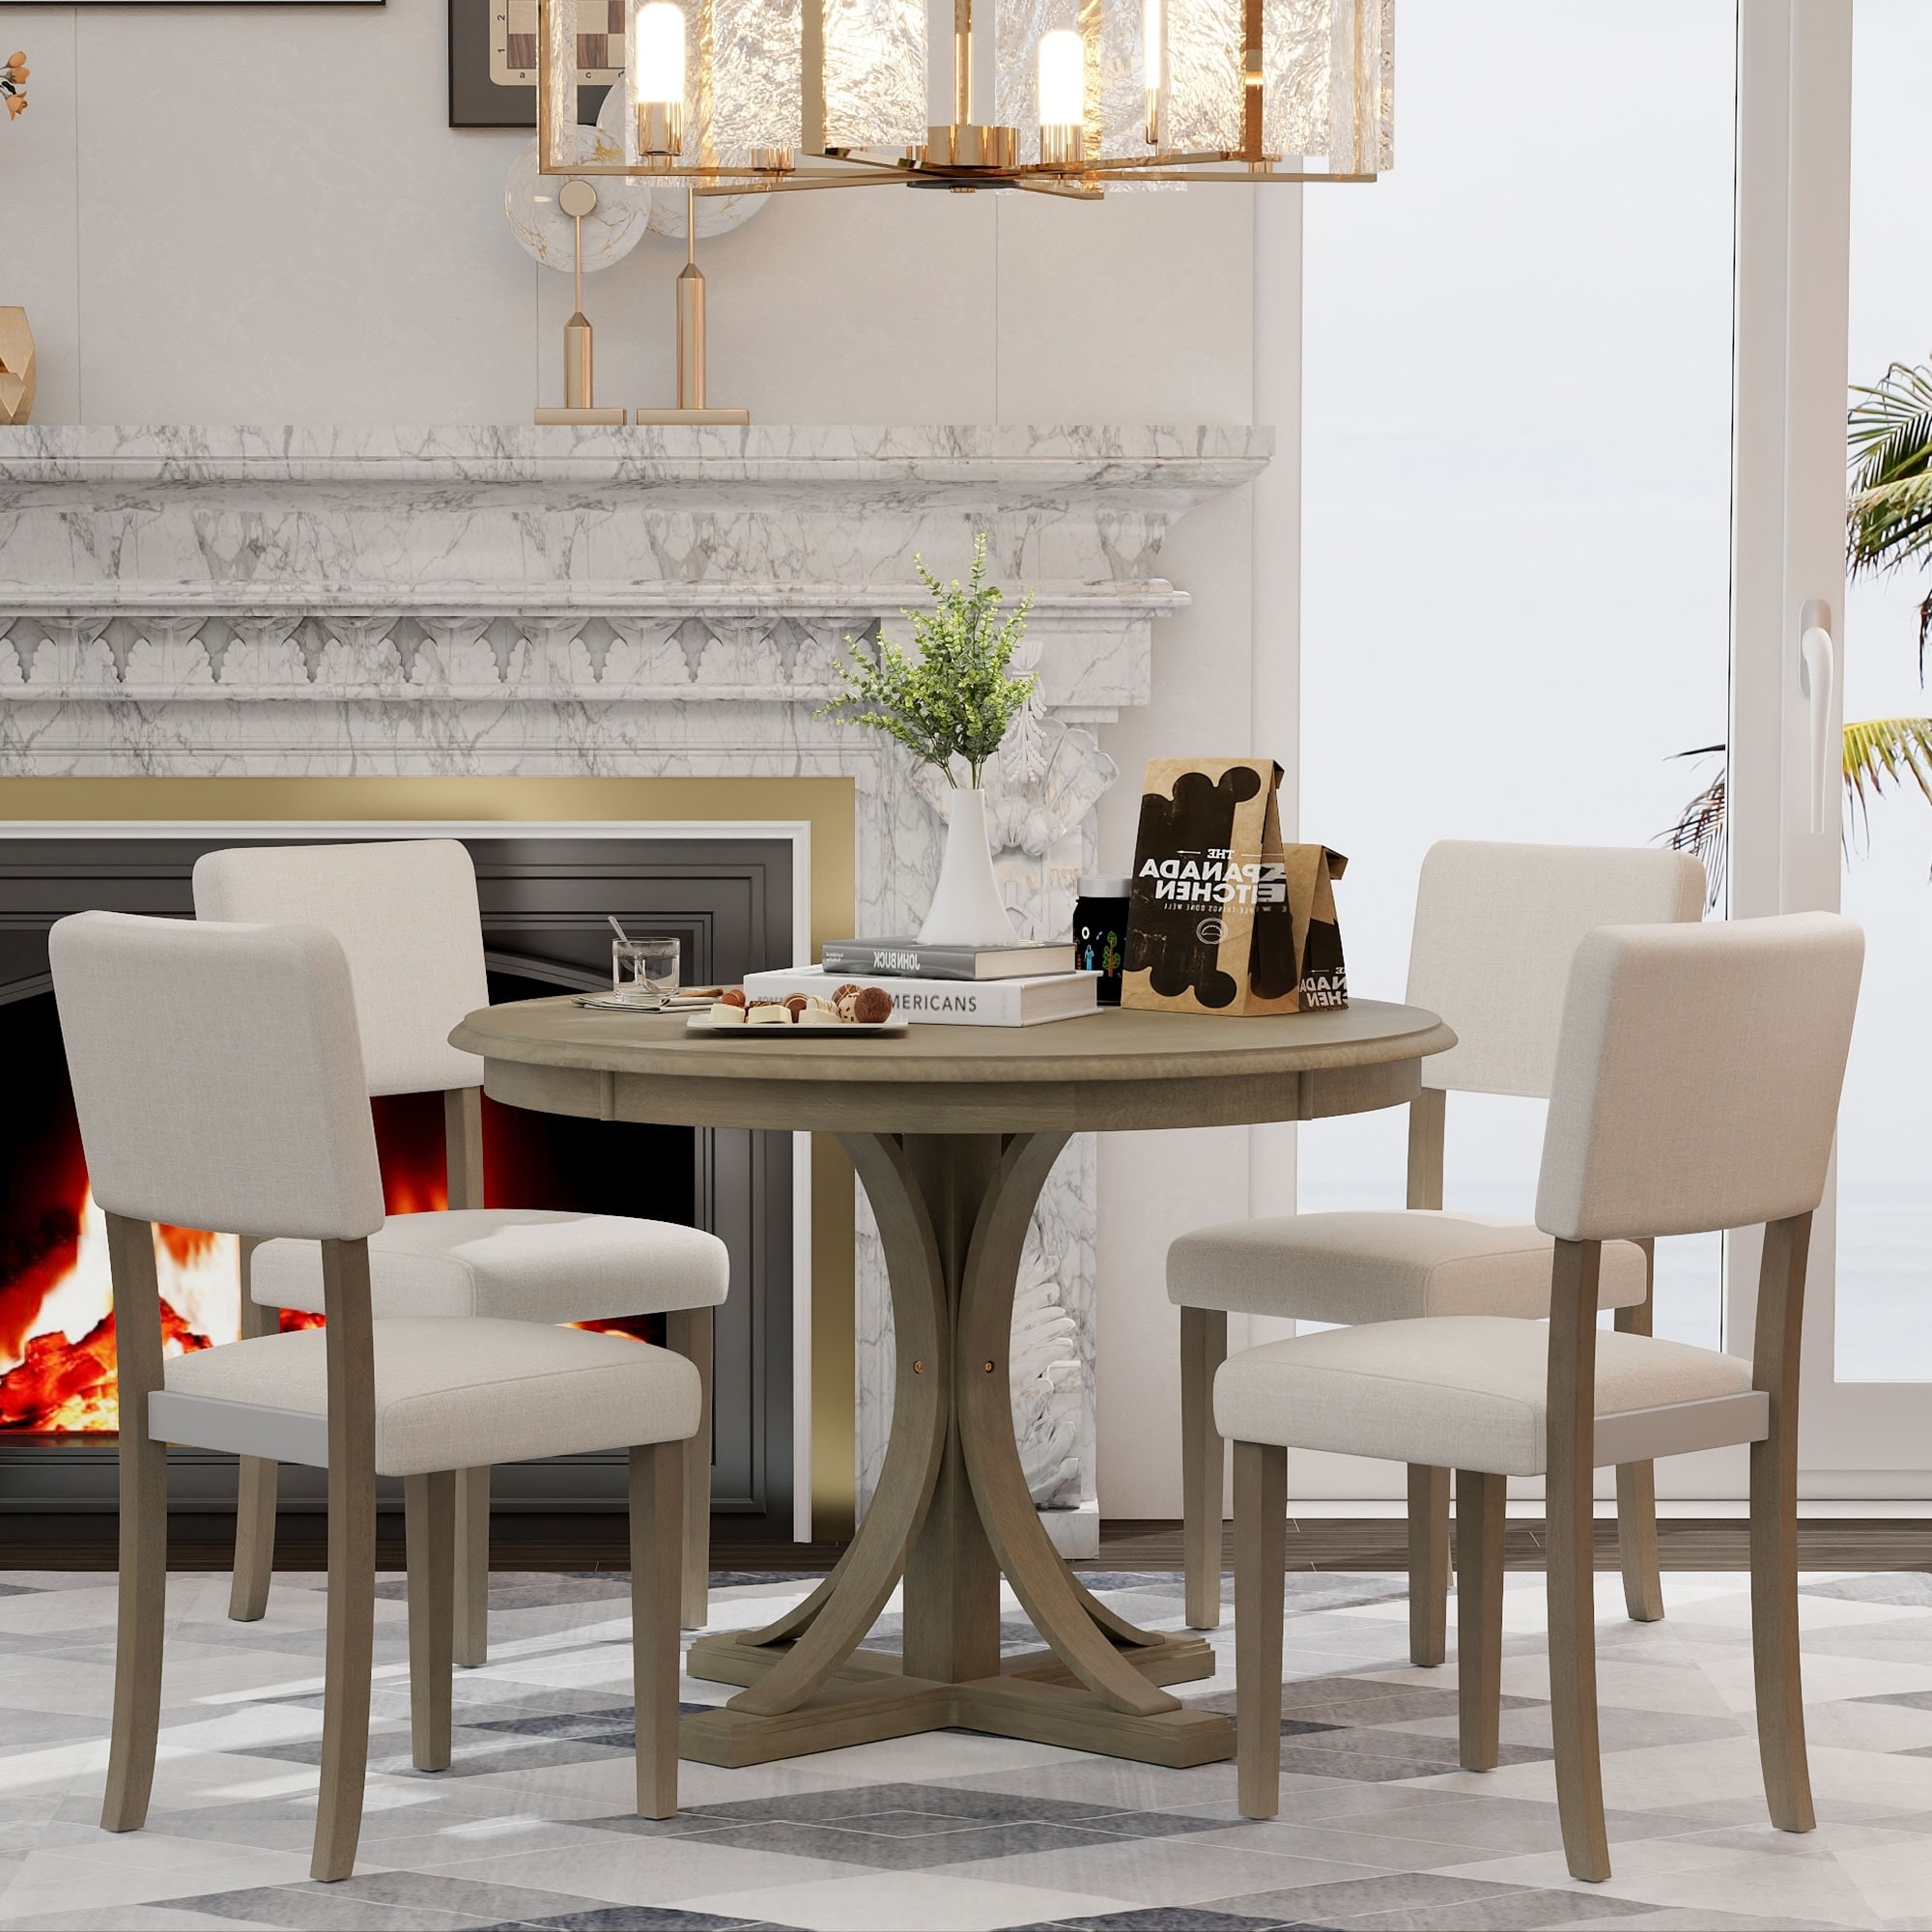 Taupe Retro Round Dining Table Set  5-piece With Curved Trestle Style Table Legs And 4 Upholstered Chairs For Dining Room